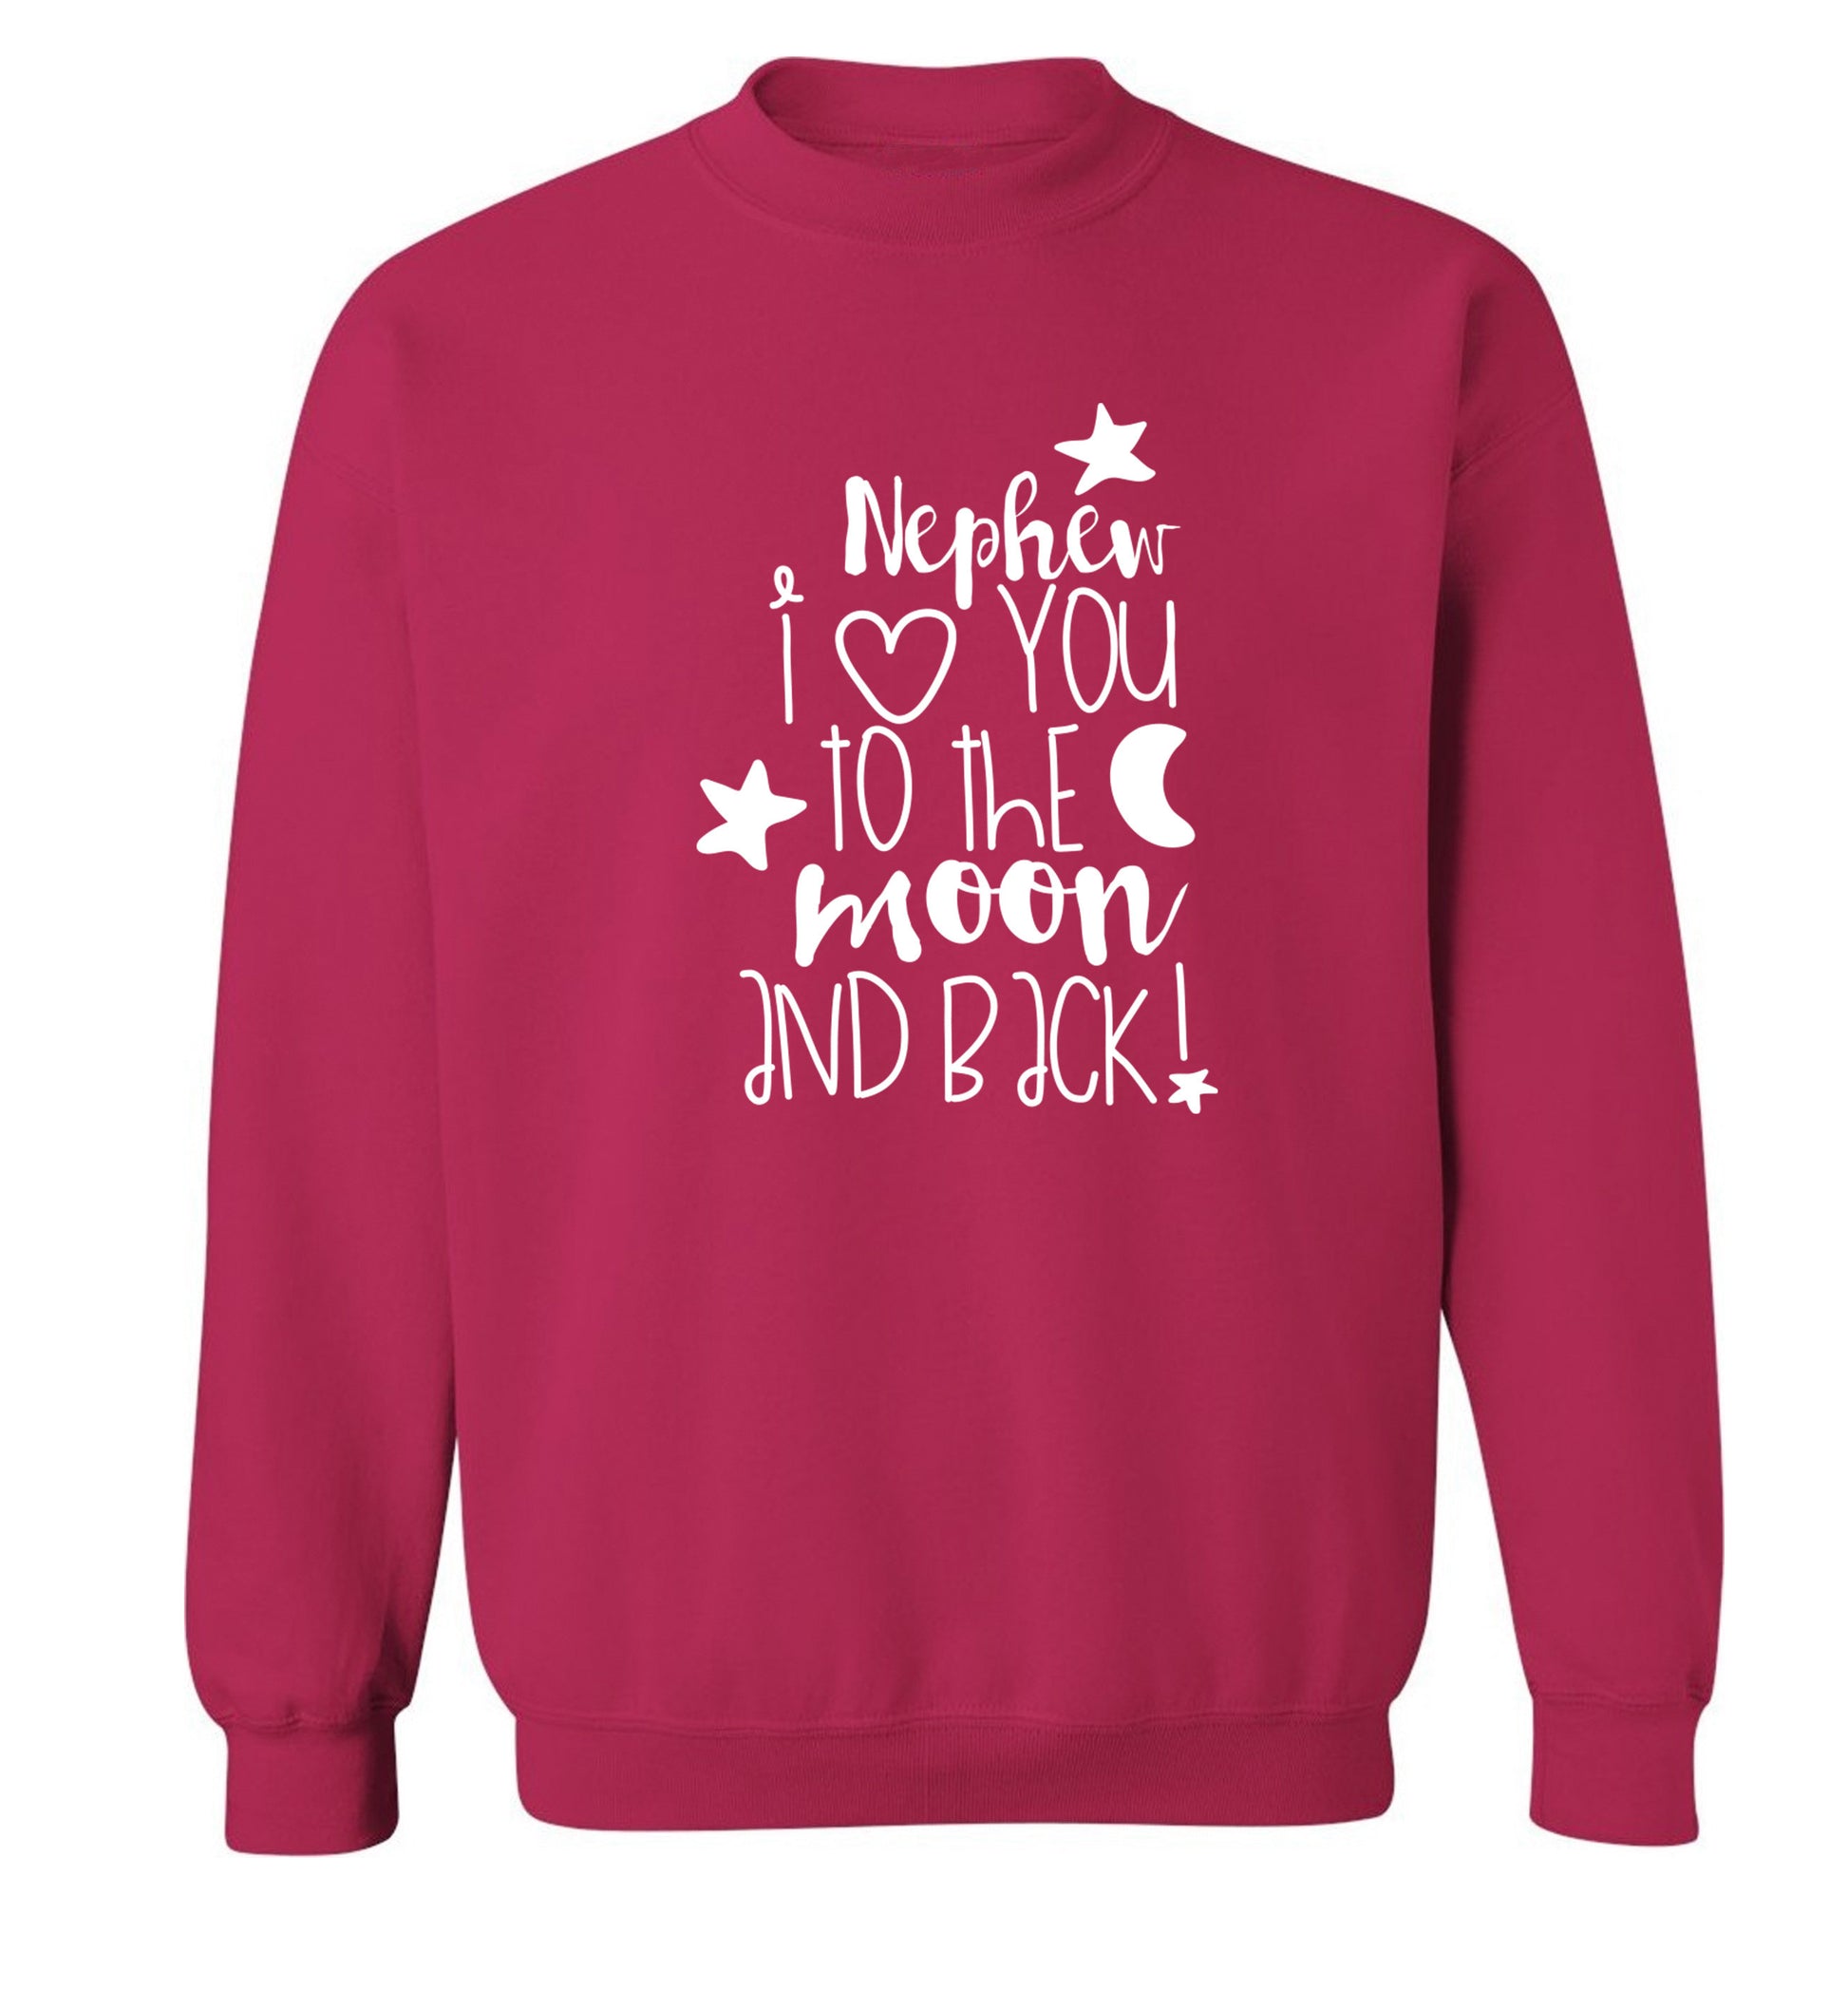 Nephew I love you to the moon and back Adult's unisex pink  sweater XL